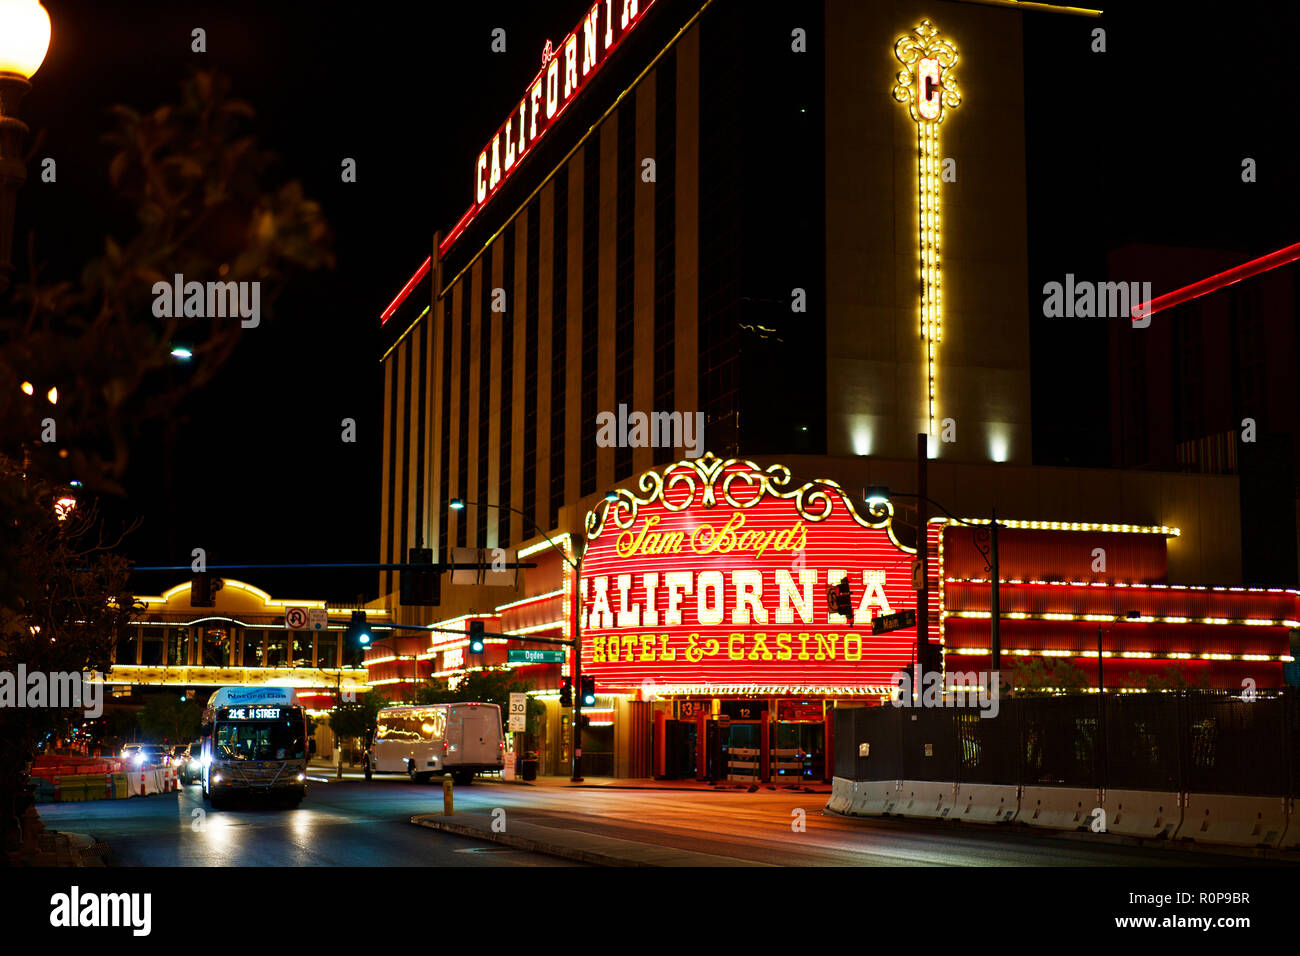 Las Vegas Nevada Usa May 22 18 Neon Sign Of The Hotel California Night View Of The Building Stock Photo Alamy